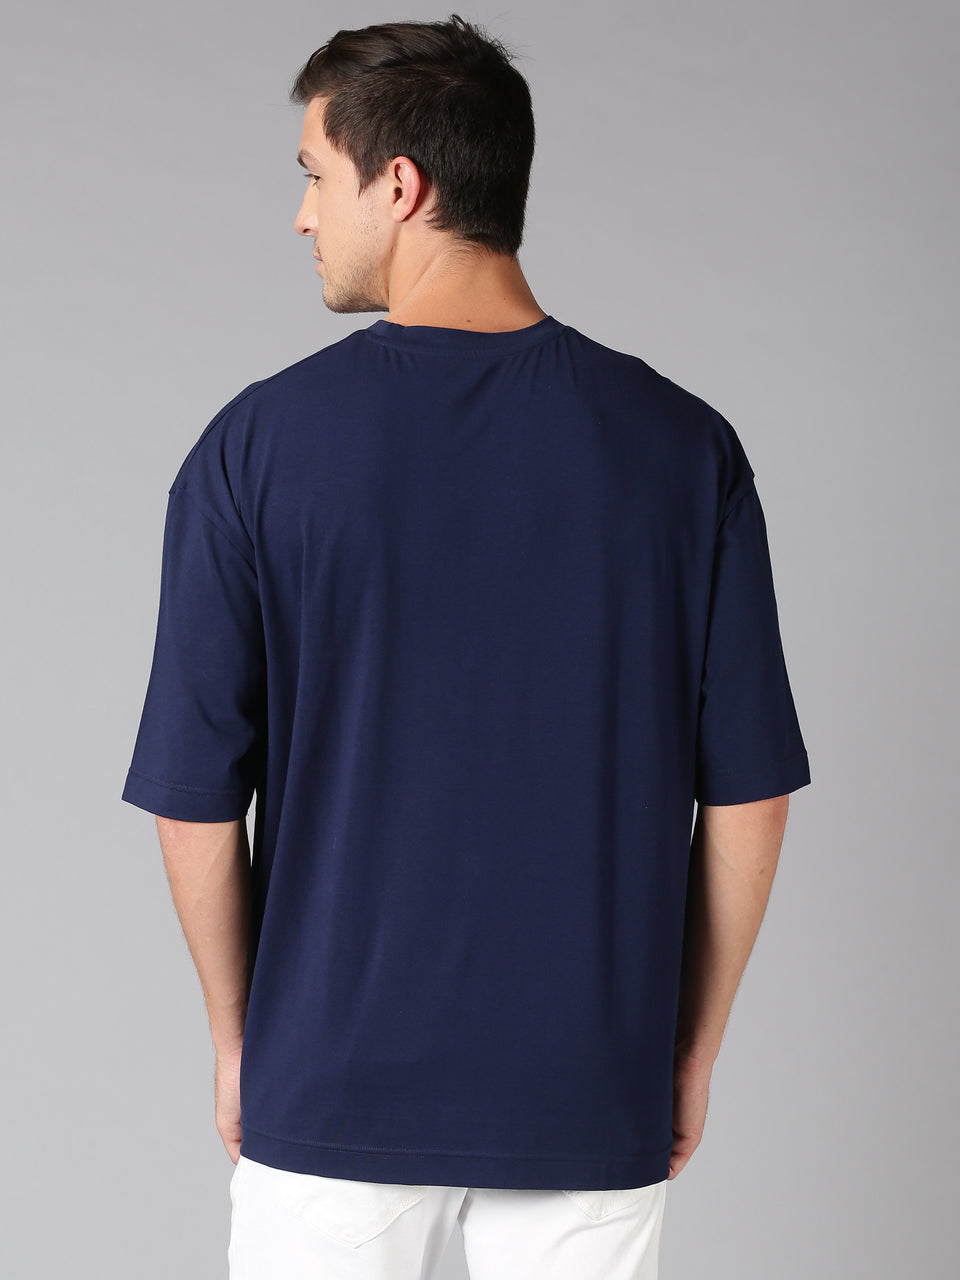 Men navy blue printed over sized t-shirt